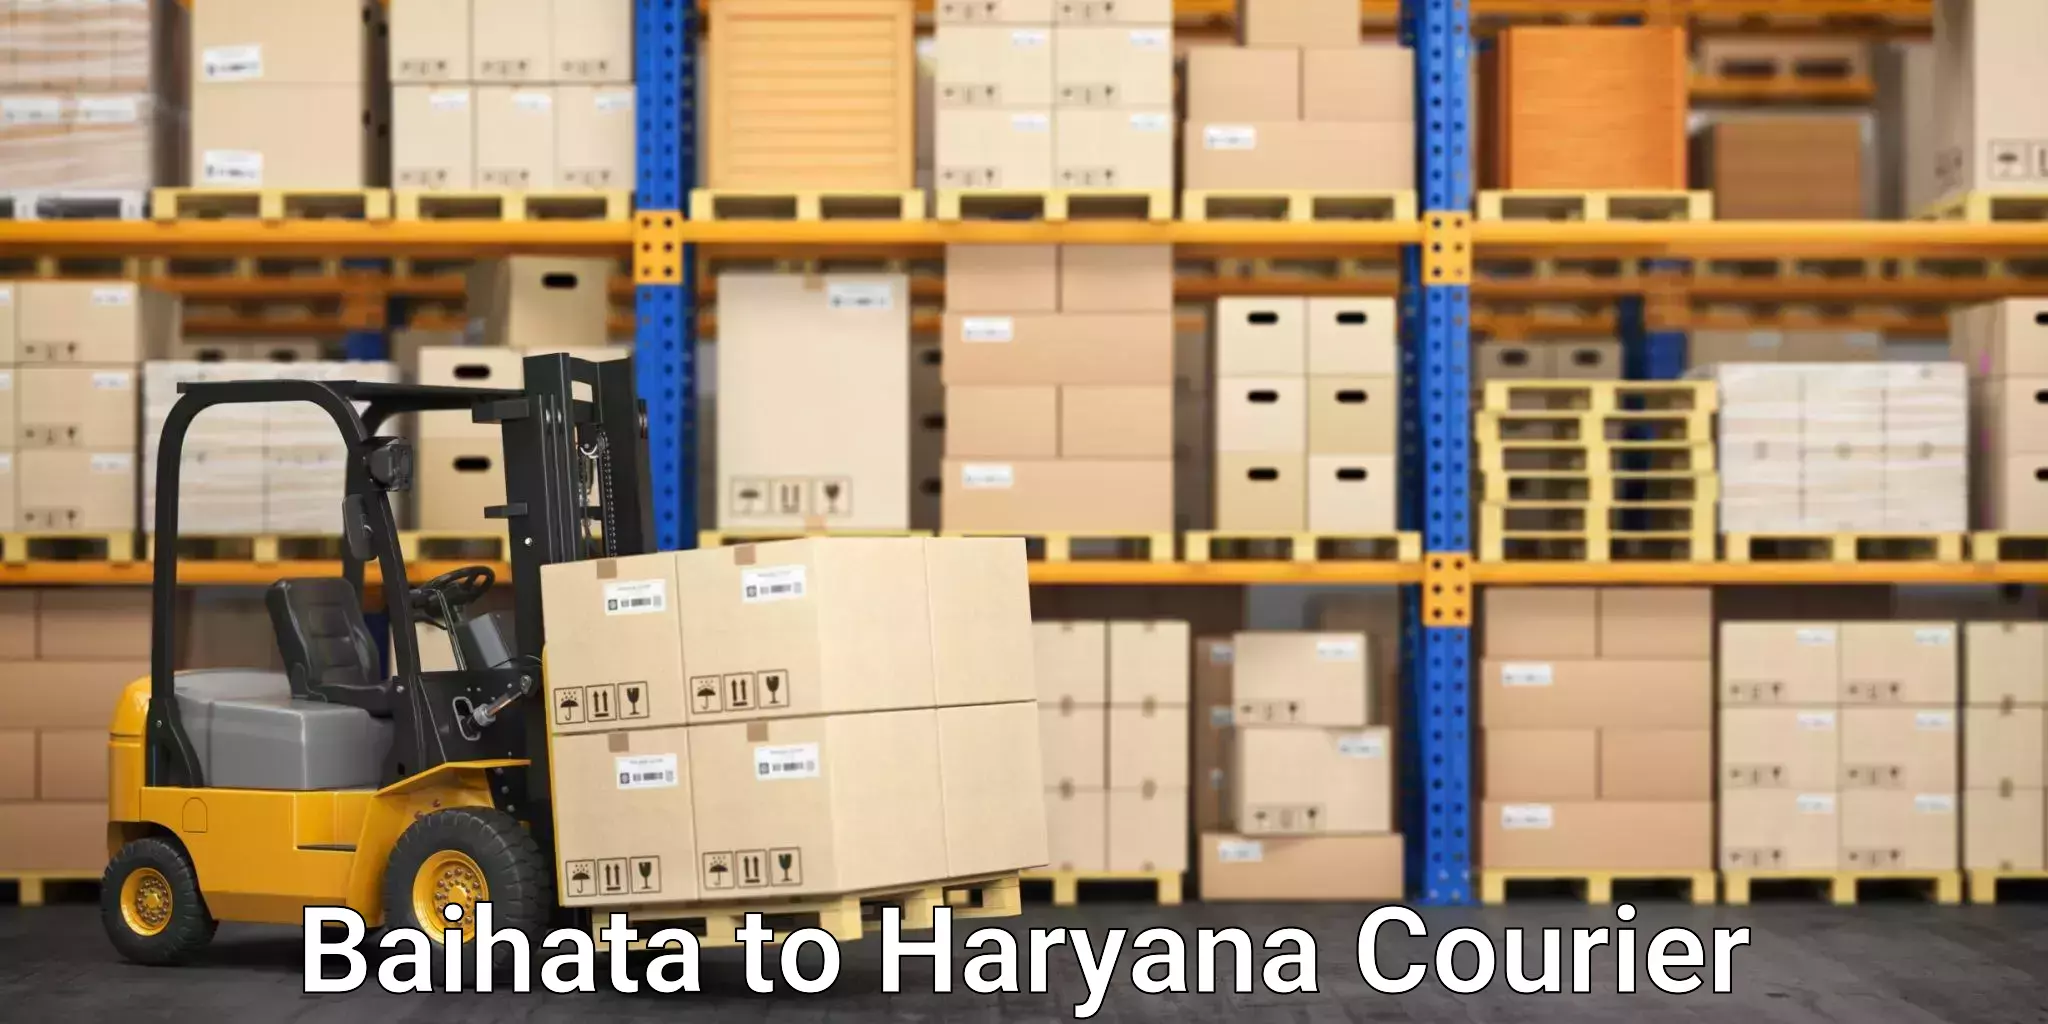 Next day courier Baihata to Sonipat